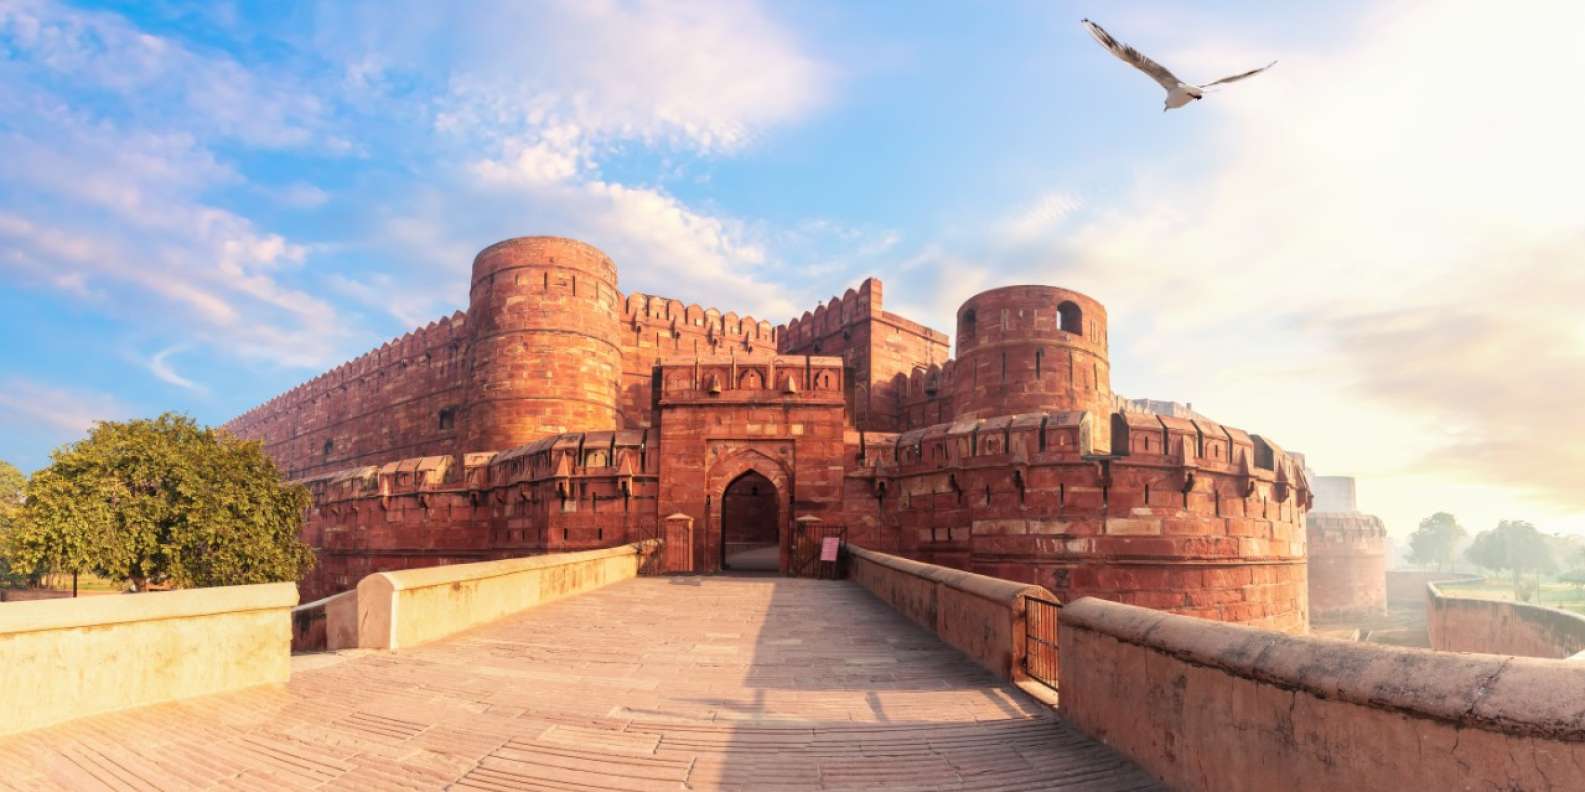 Private Agra Day Trip from Delhi by AC Car | GetYourGuide